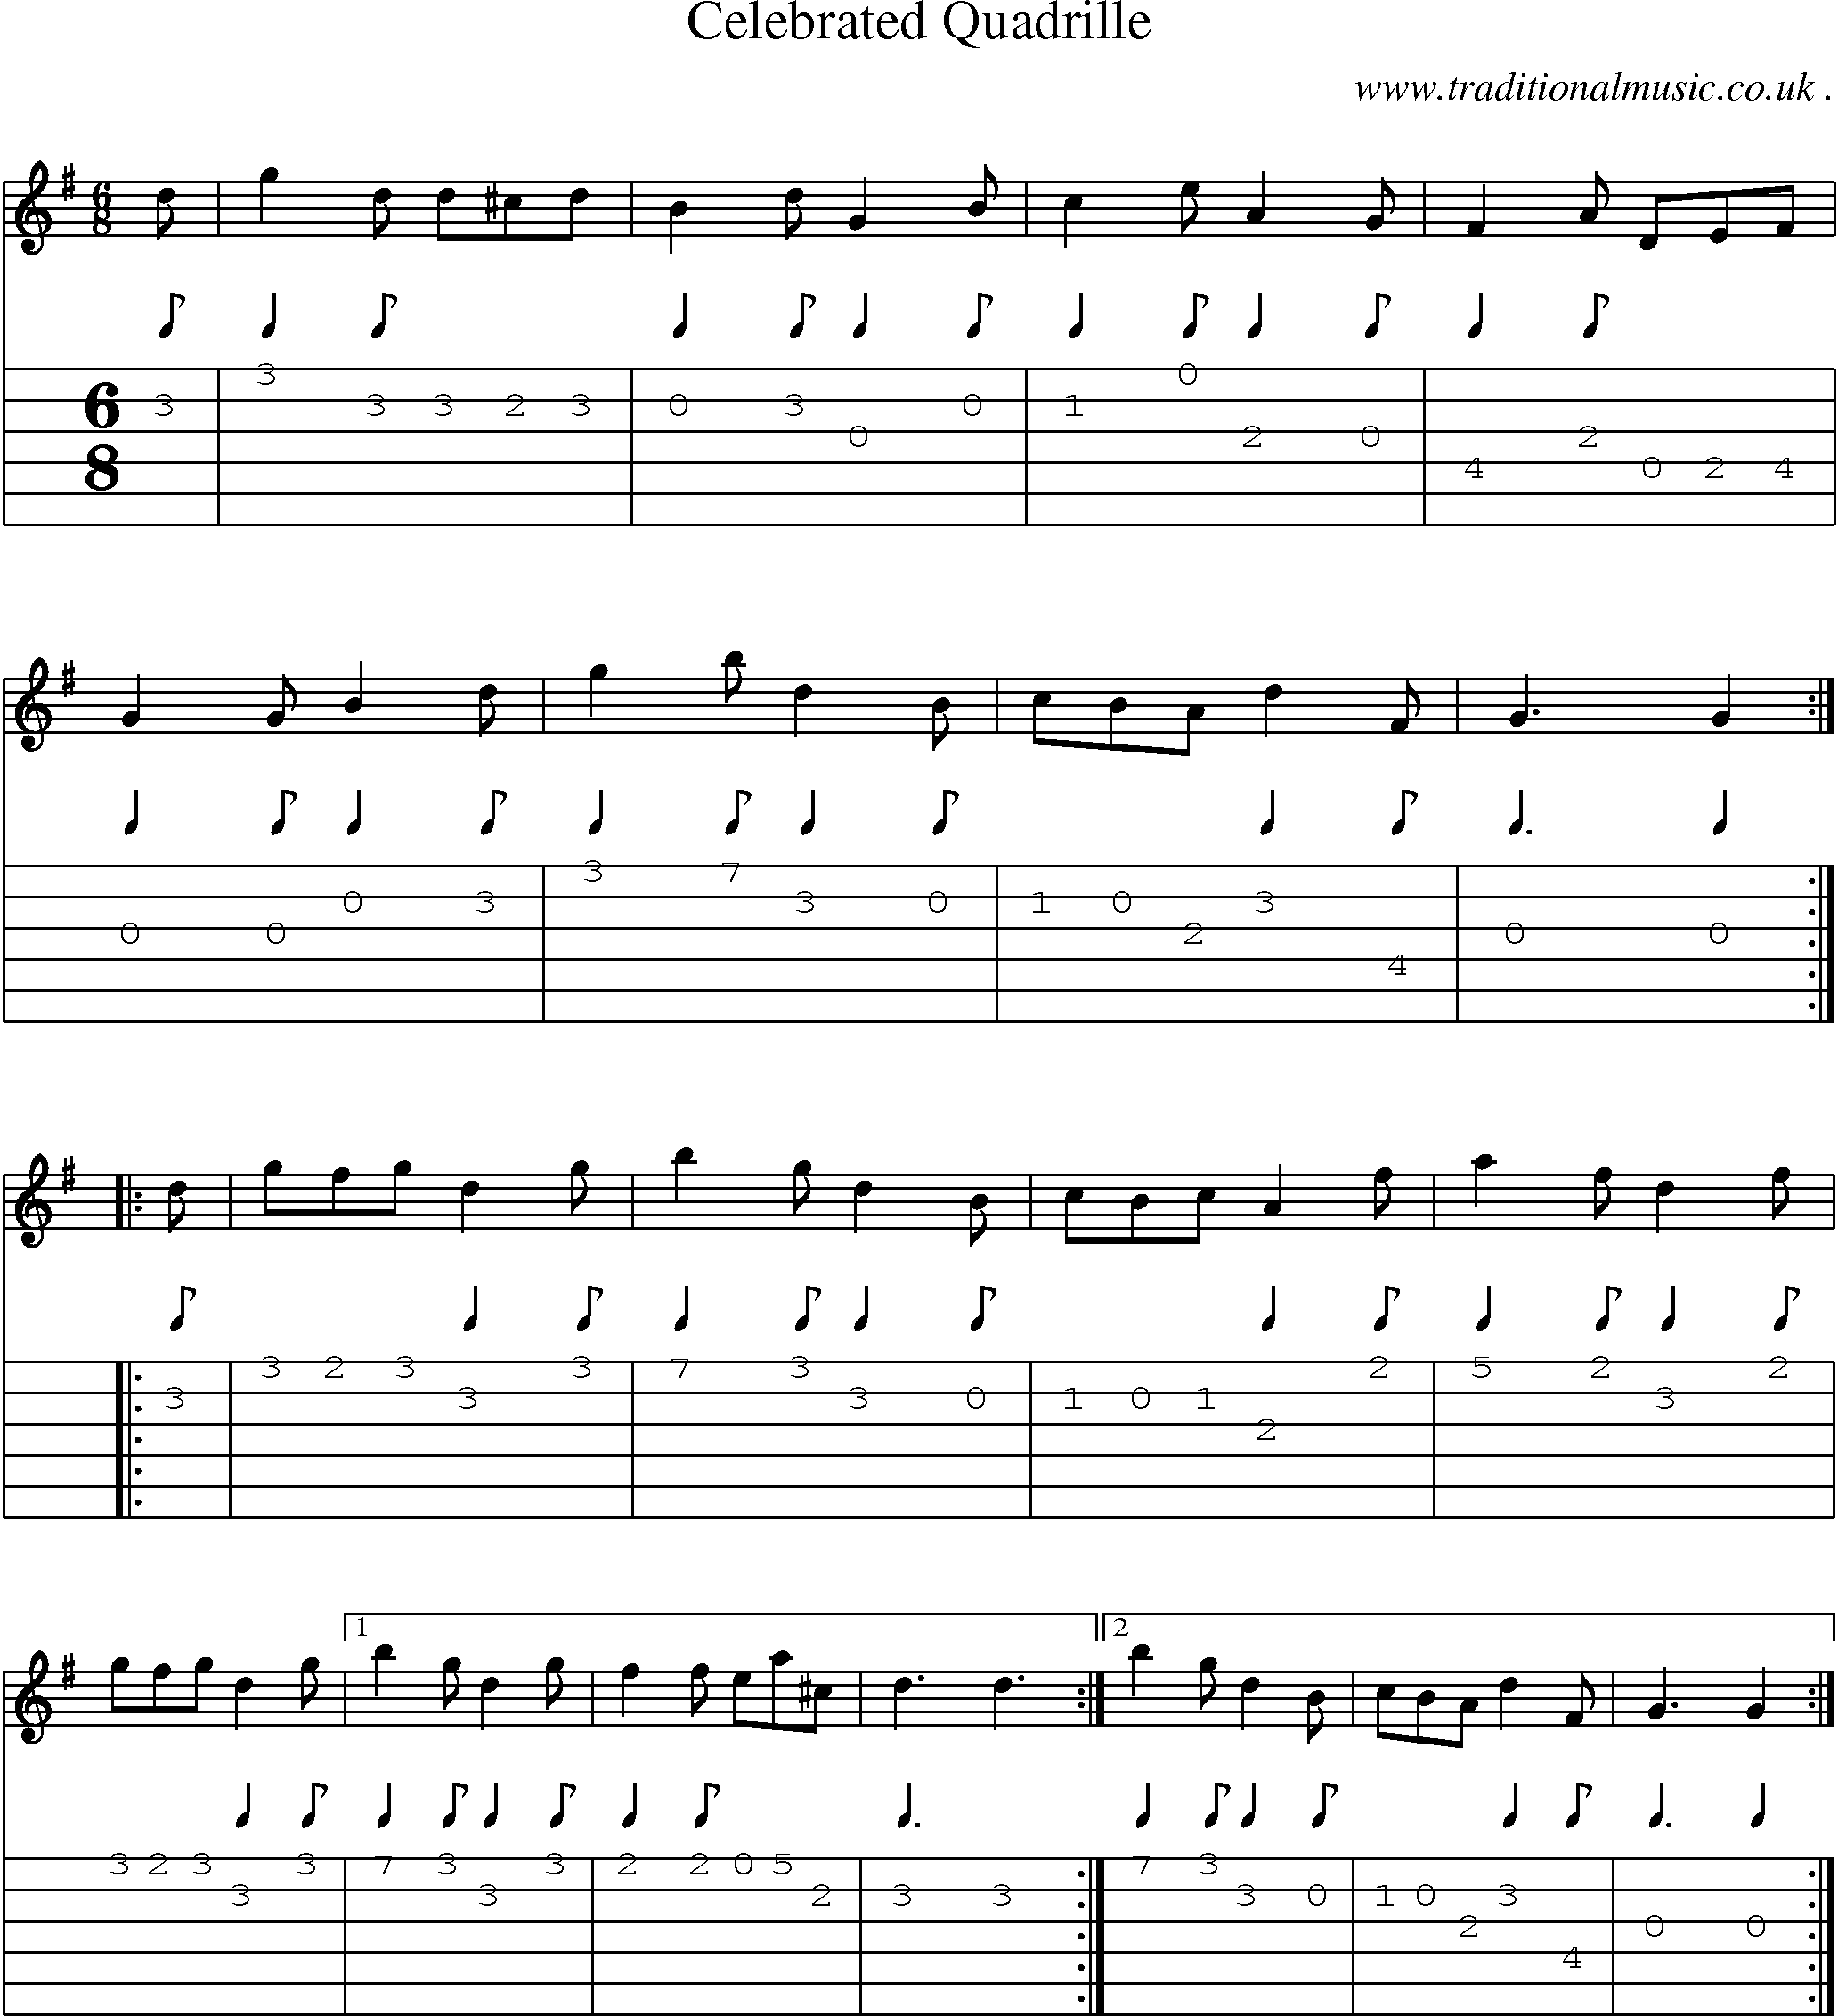 Sheet-Music and Guitar Tabs for Celebrated Quadrille